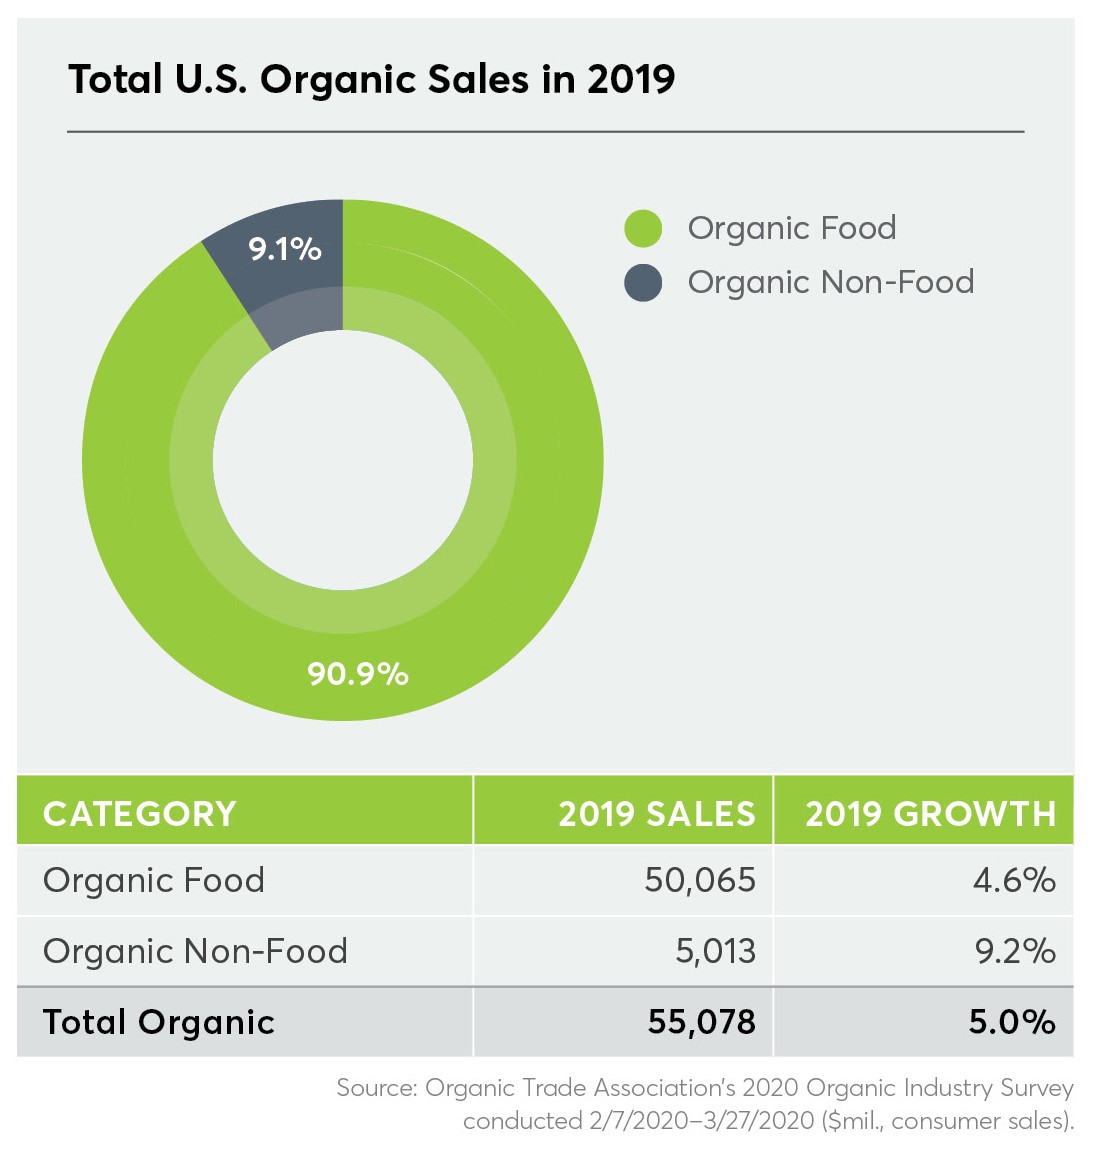 COVID-19 will shape organic industry in 2020 after banner year in 2019 | OTA